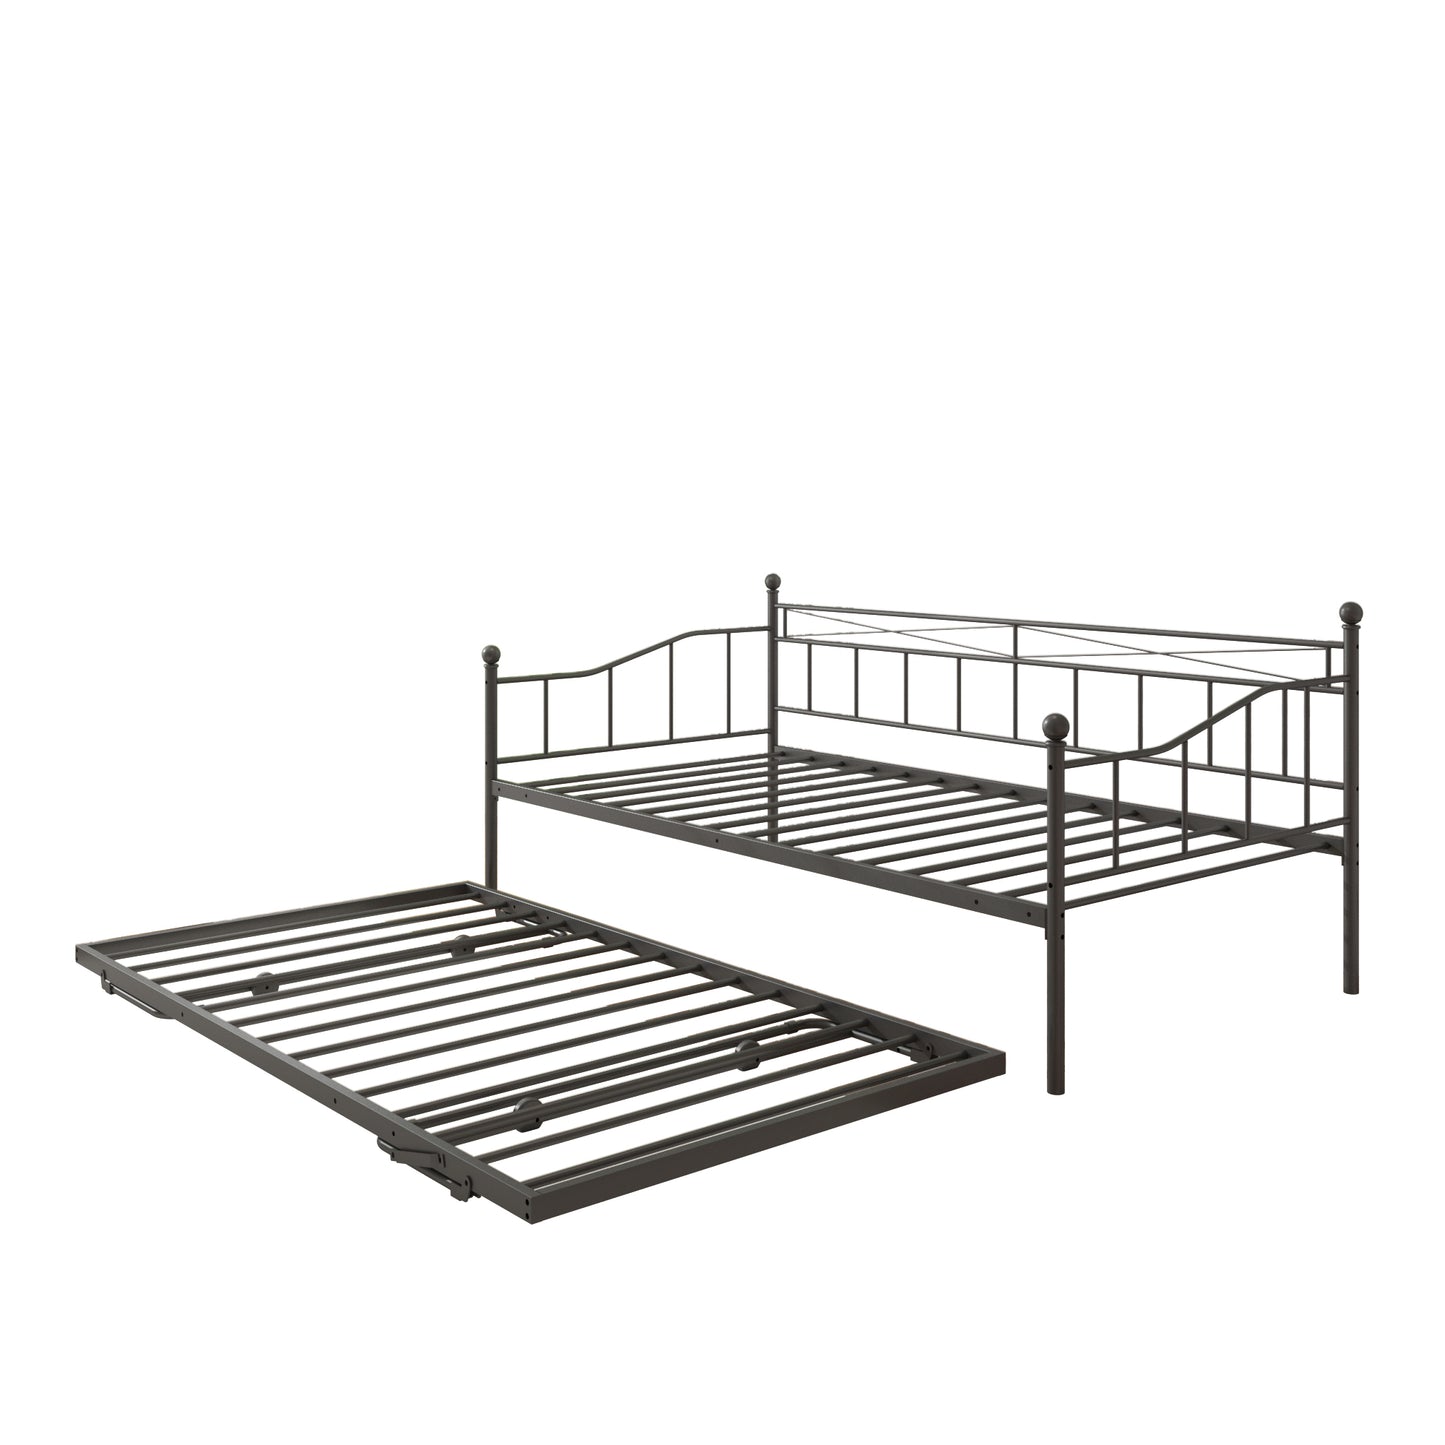 Twin Daybed with Pop Up Trundle, Metal Twin Size Daybed Frame, Space Saving Sofa Bed with Trundle Bed, Modern Home Platform Bed for Living Room/Bedroom, No Box Spring Needed, Black, D6607